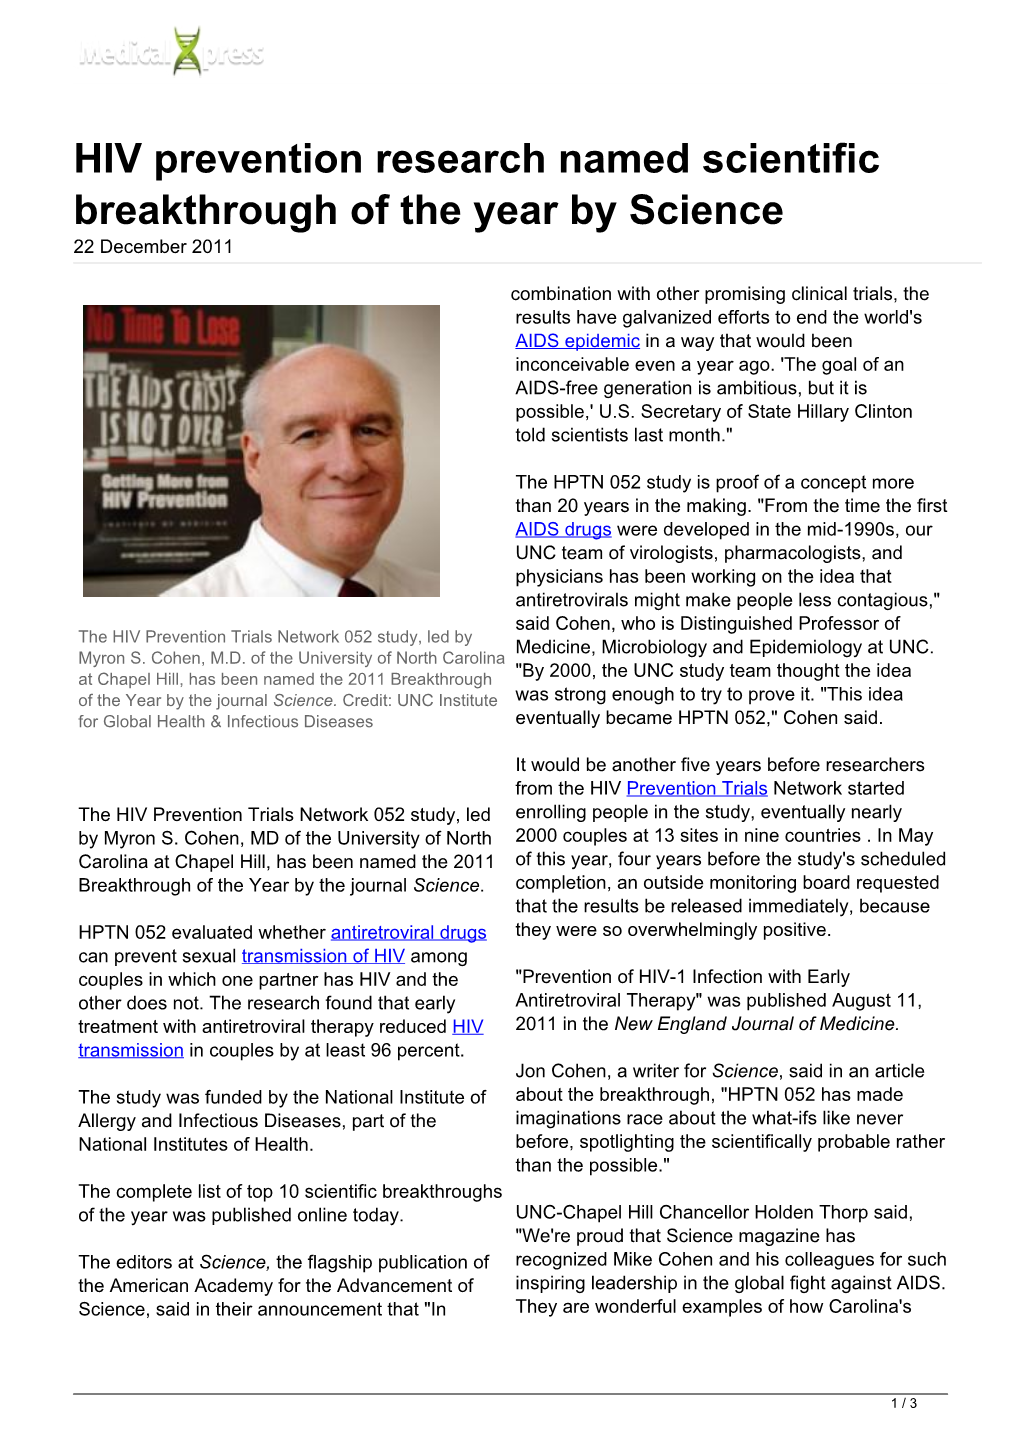 HIV Prevention Research Named Scientific Breakthrough of the Year by Science 22 December 2011